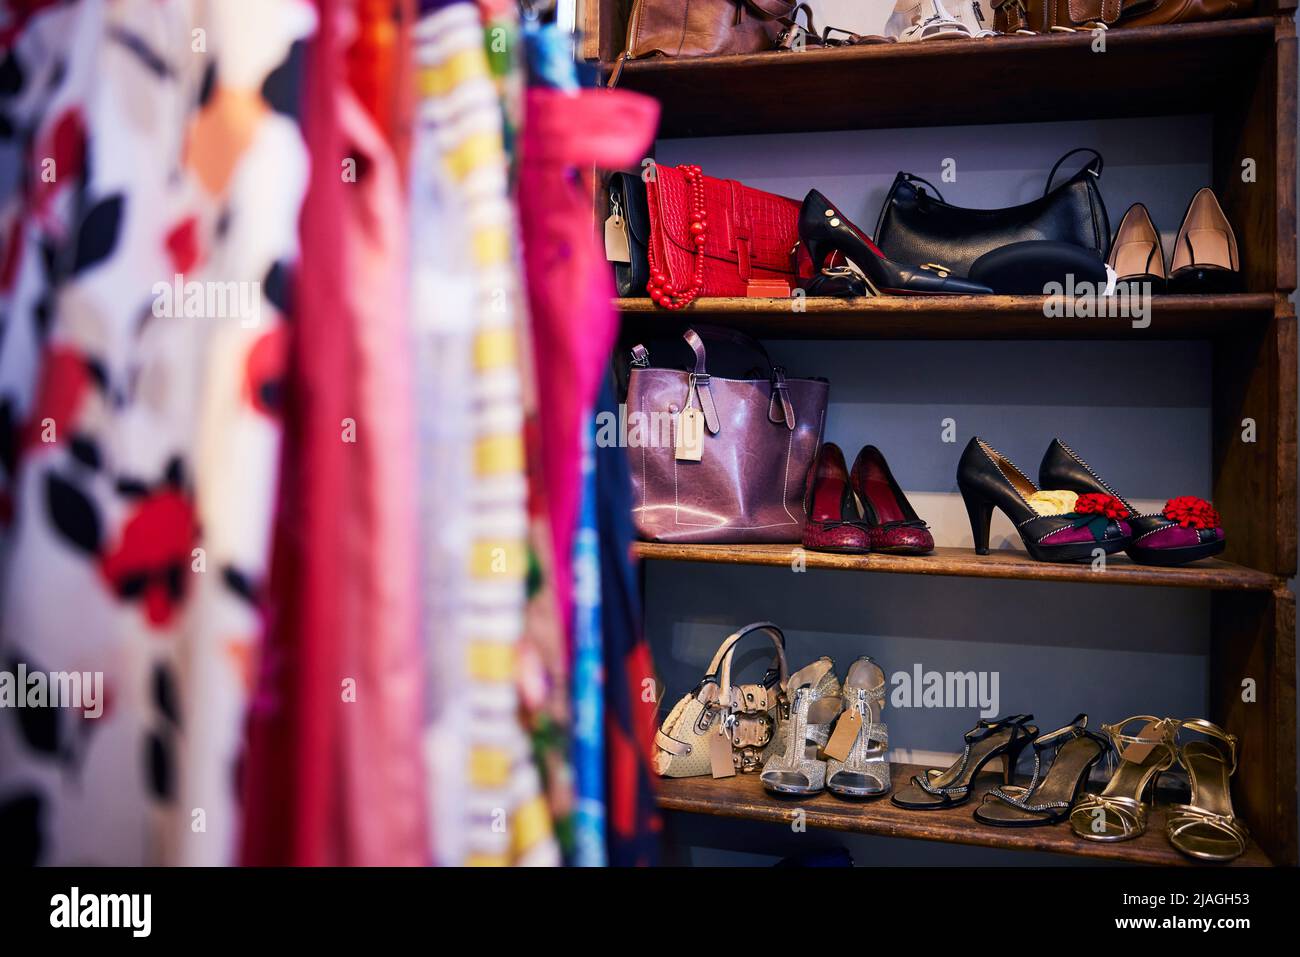 Interior Of Charity Shop Or Thrift Store Selling Used And Sustainable Clothing Shoes And Handbags Stock Photo